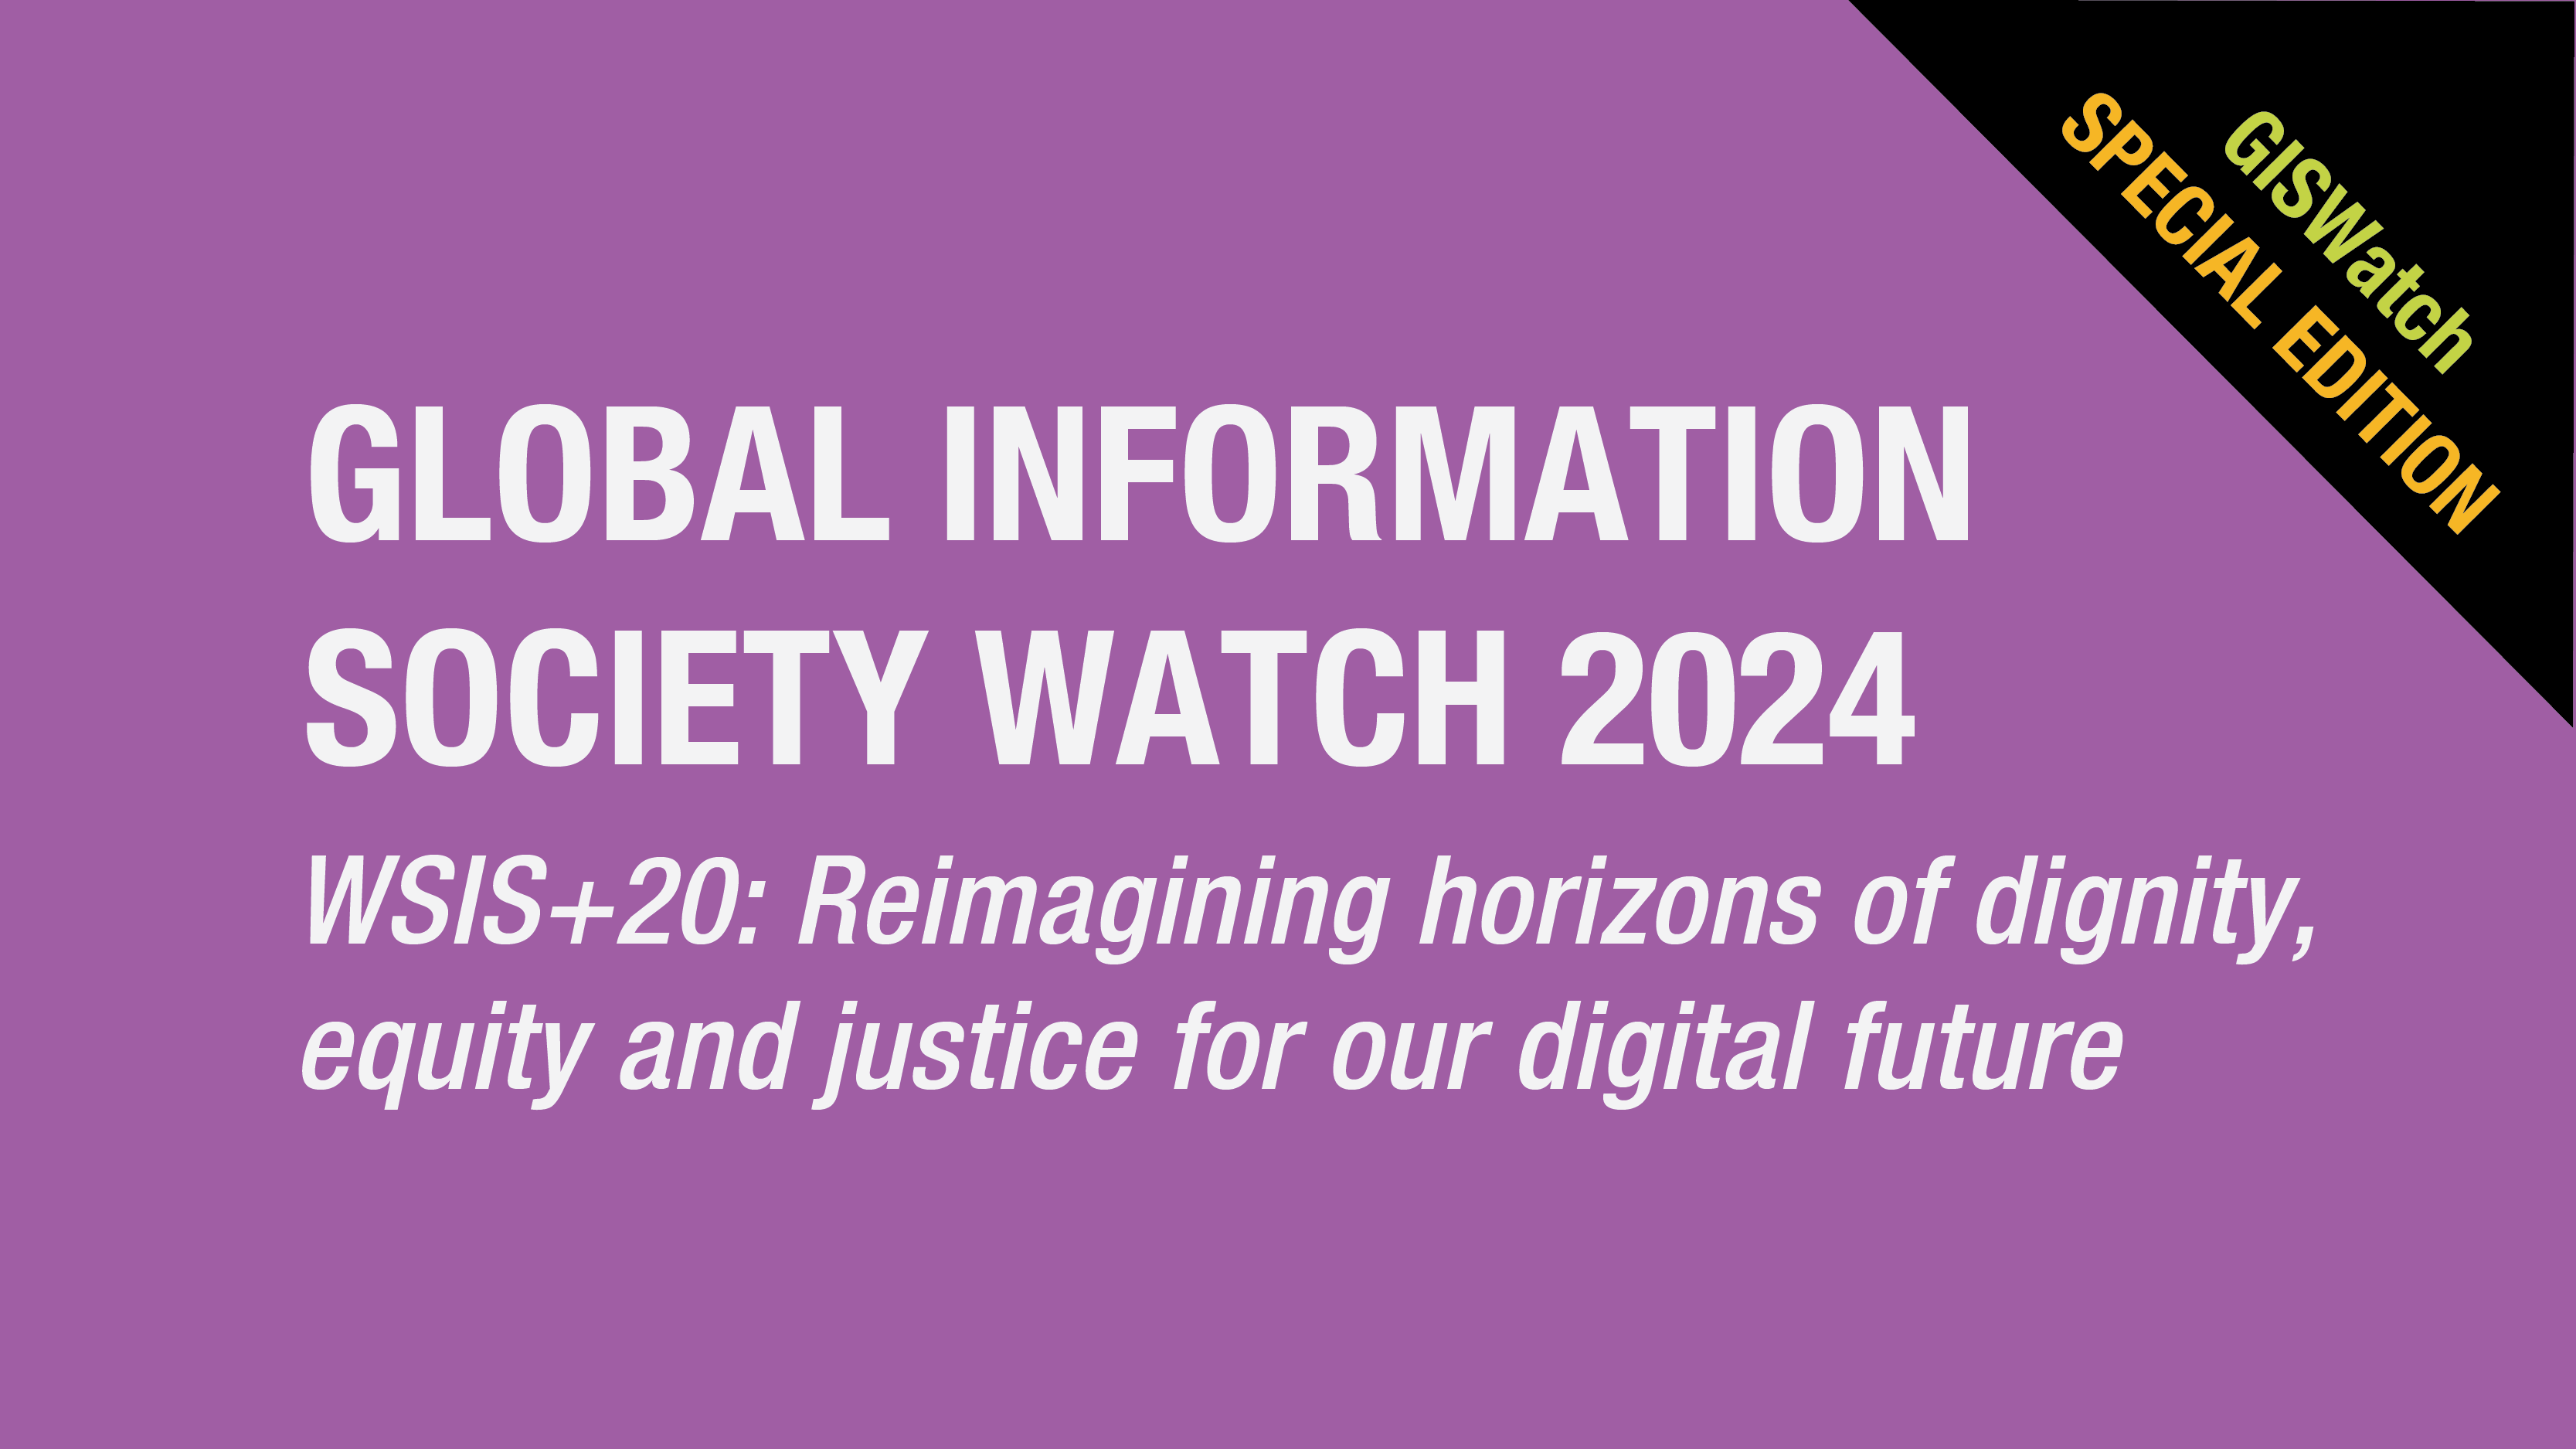 Launch of GISWatch 2024 special edition! WSIS+20: Reimagining horizons of dignity, equity and justice for our digital future